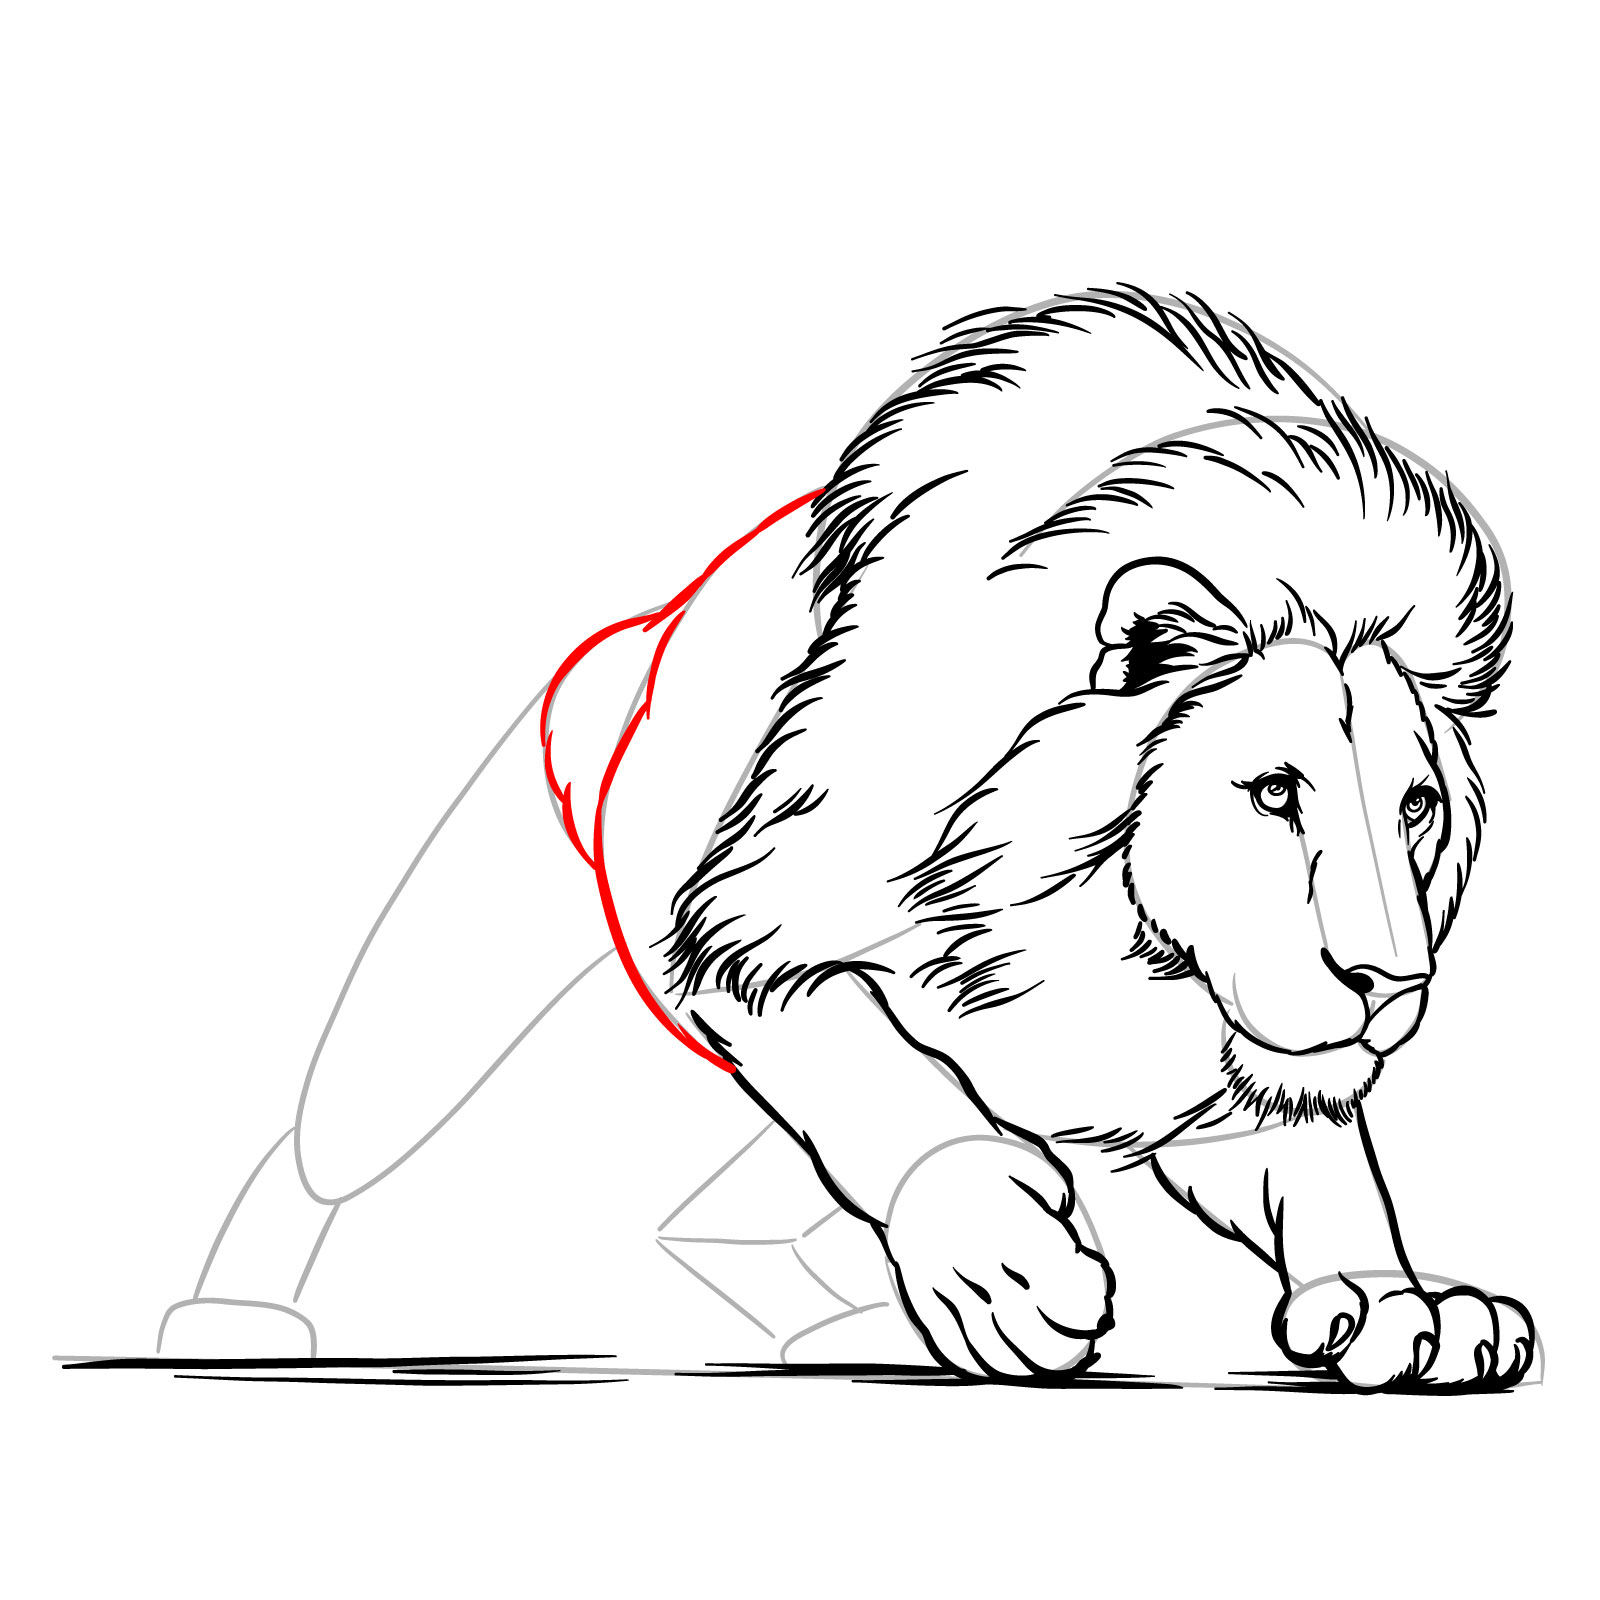 Hunting lion drawing - Step 14: Outline the overall body